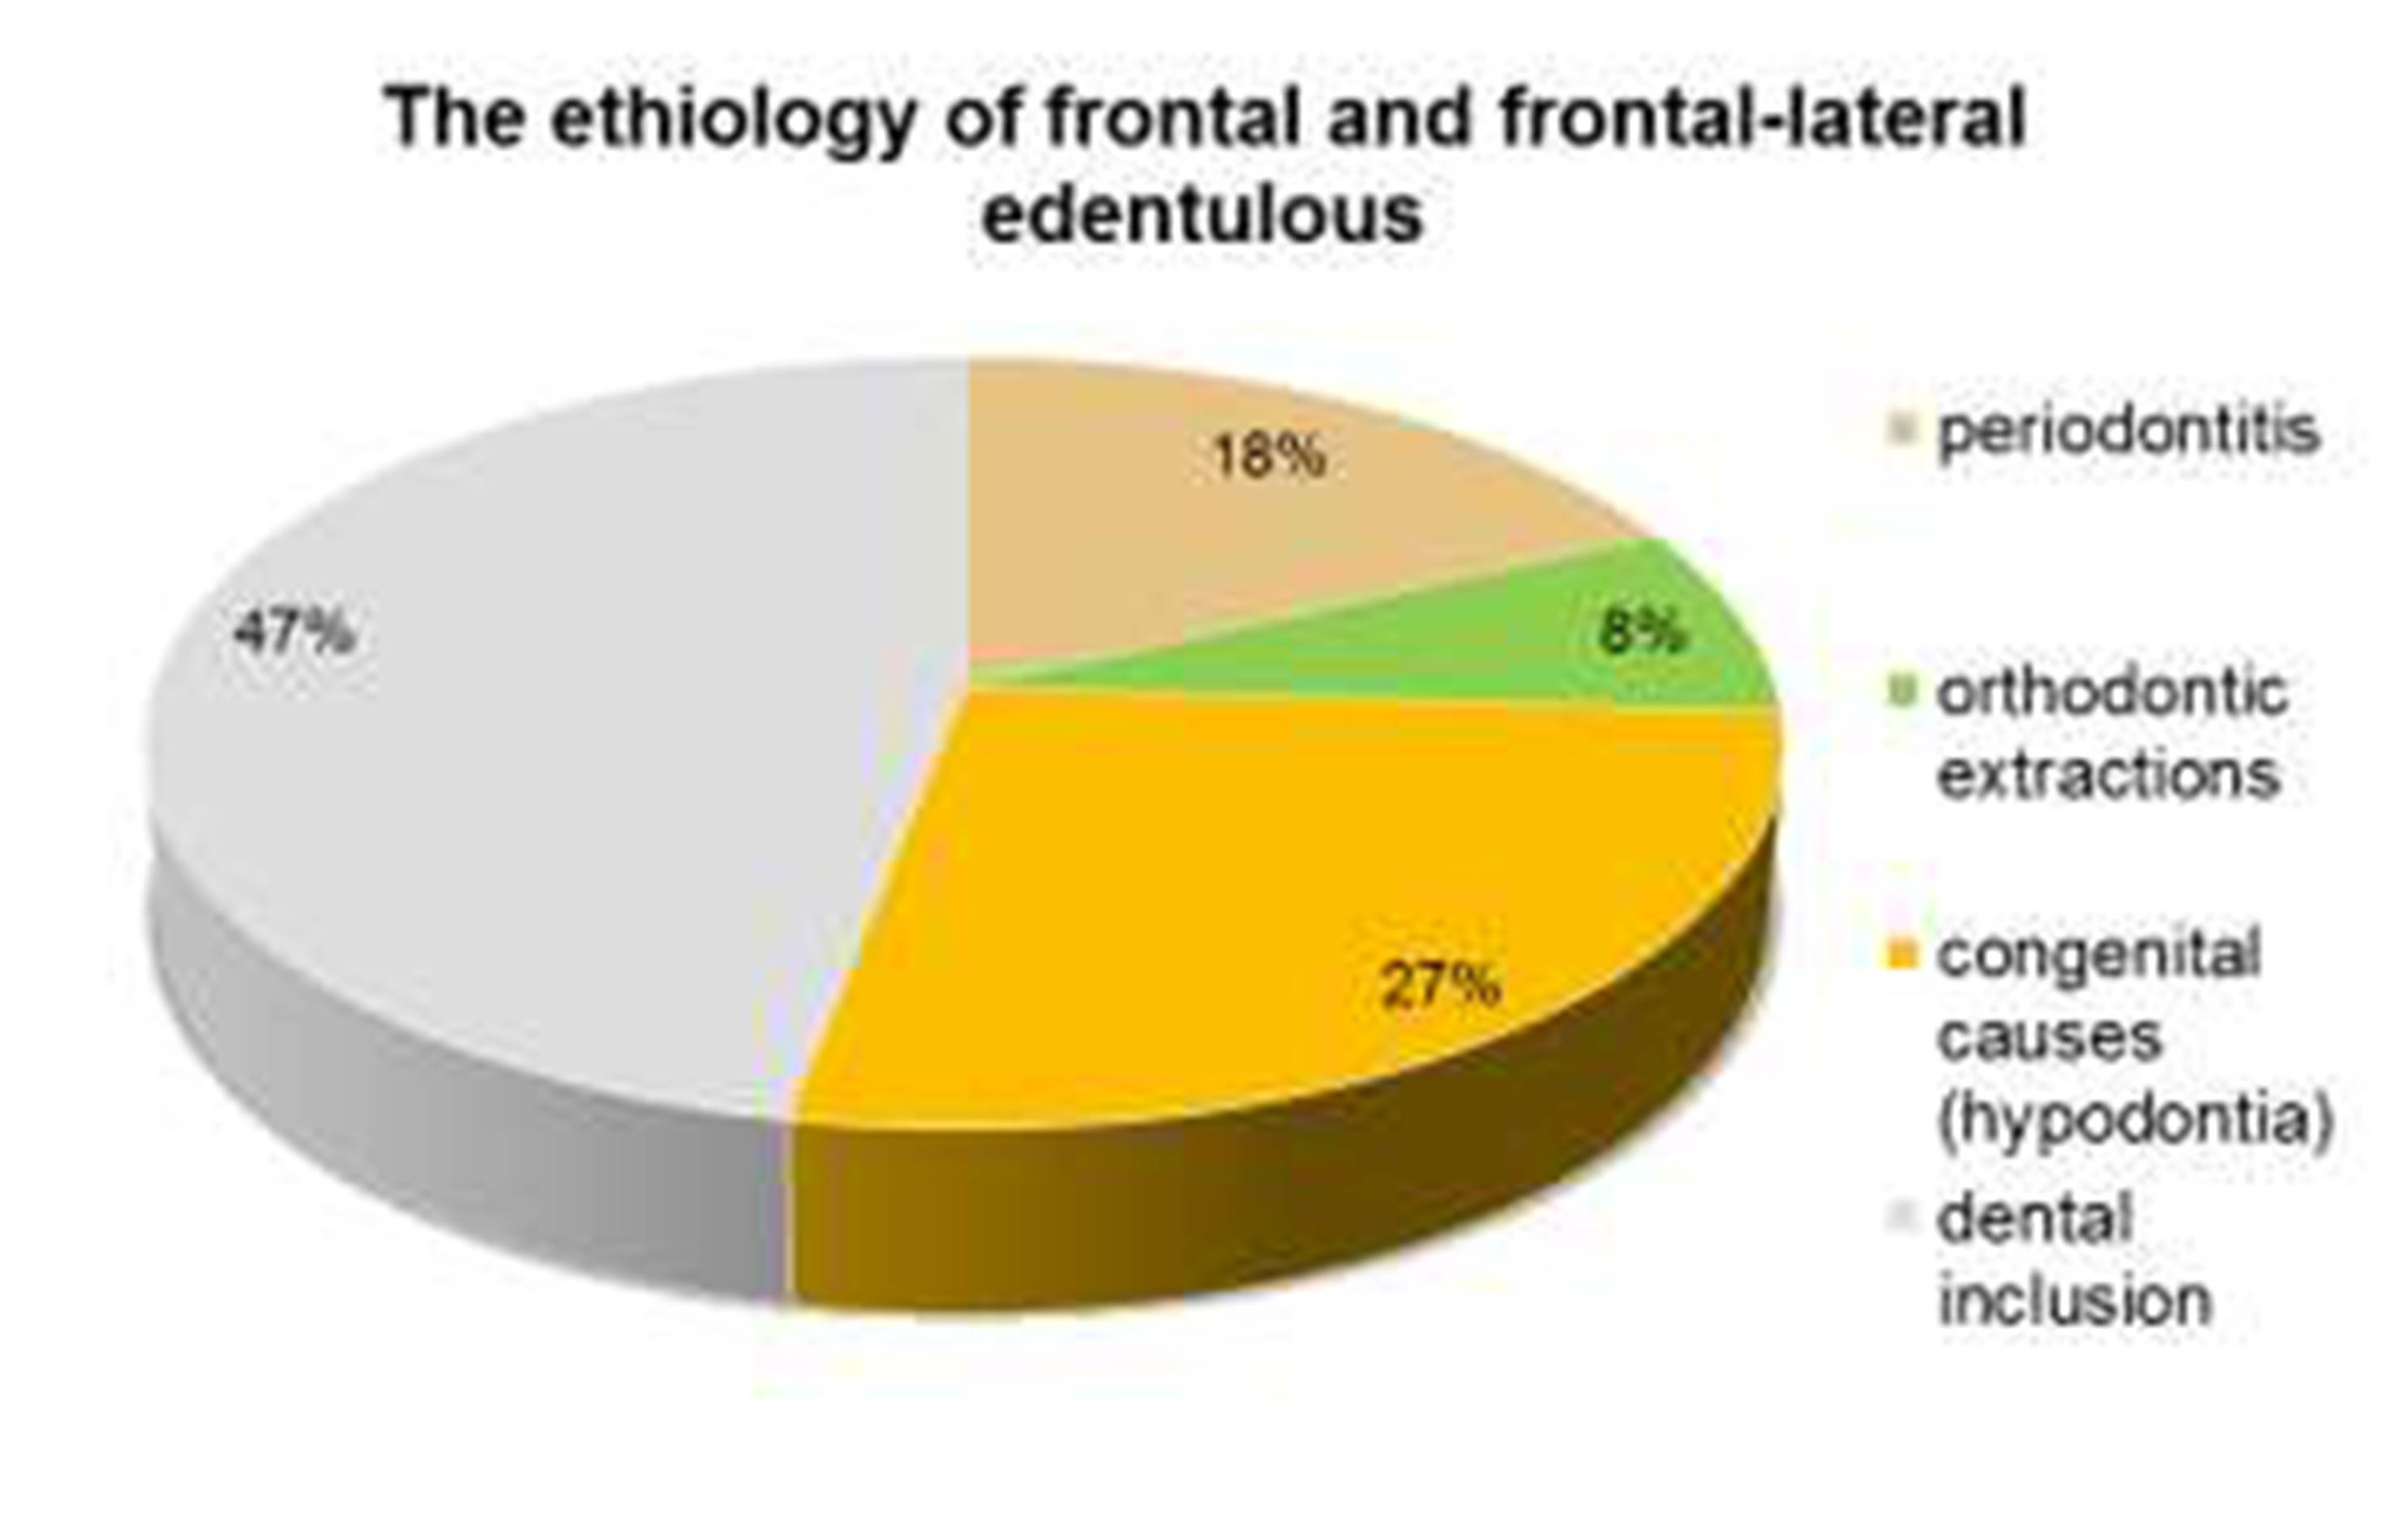 The ethiology of frontal and frontal-lateral edentulous 